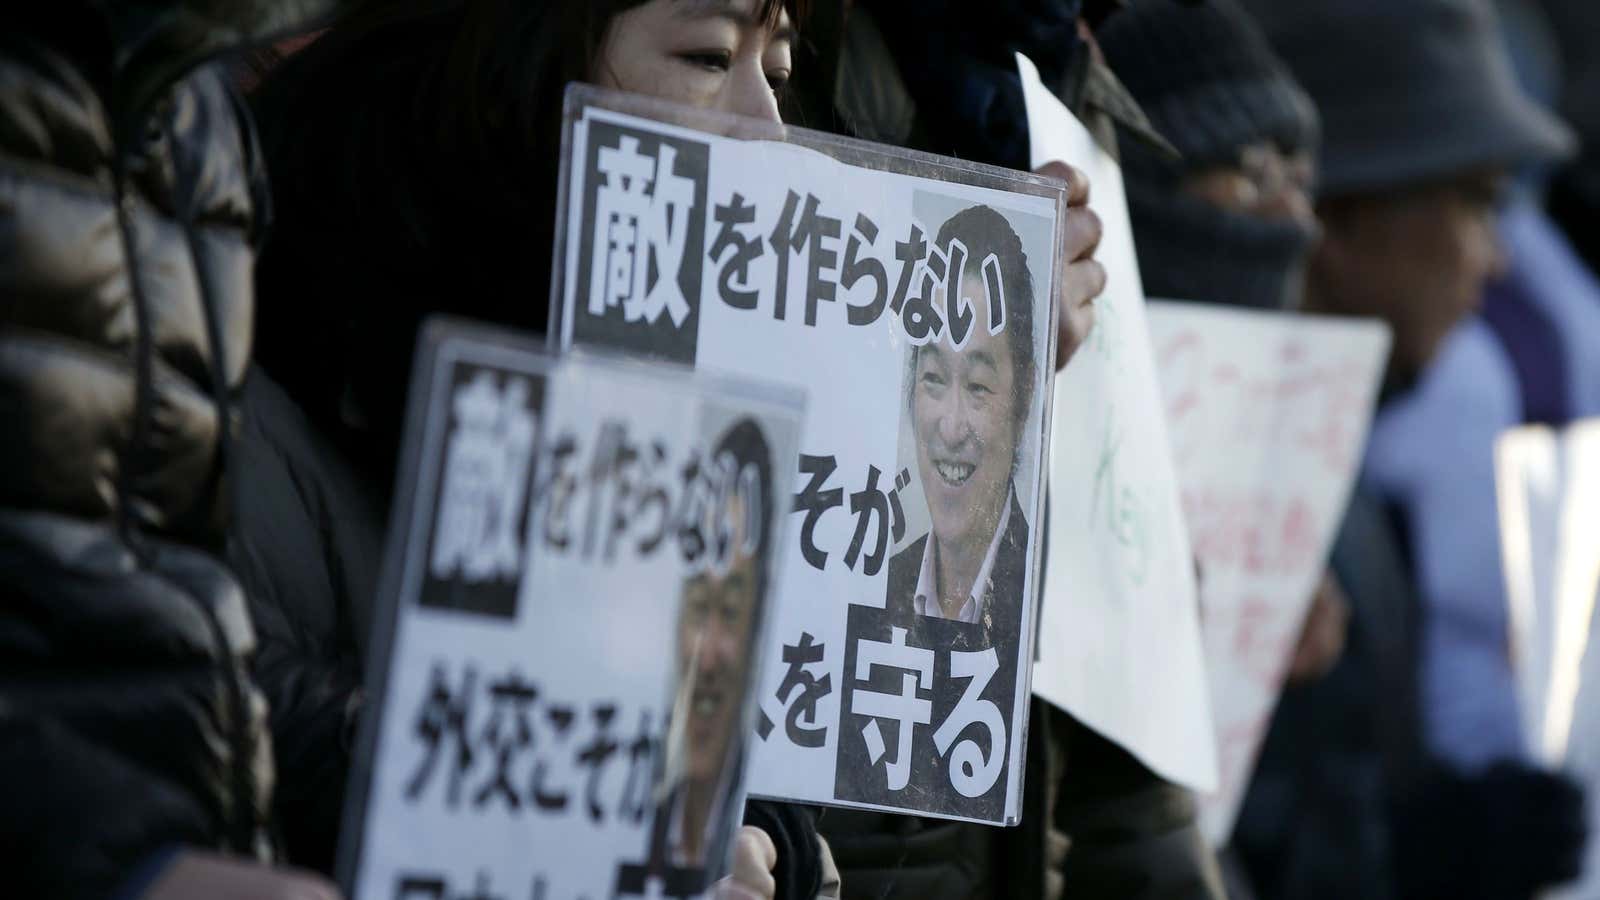 Protesters hold placards that say “Diplomacy not to make an enemy protects a Japanese.”